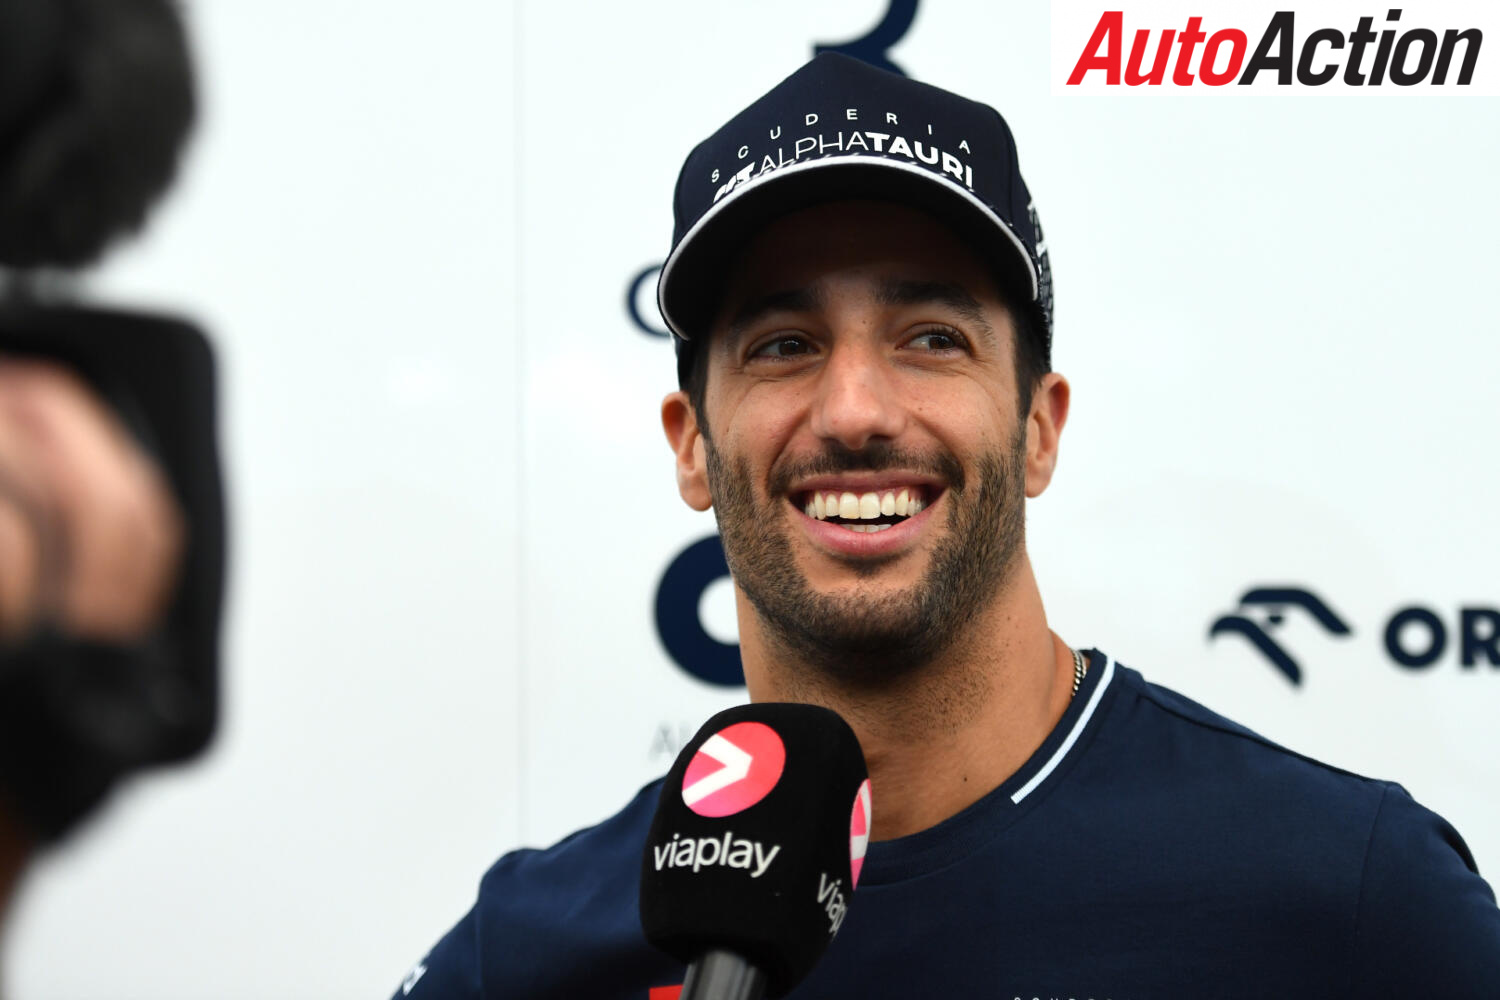 Ricciardo buzzing for Brazil, not worried about Red Bull - Auto Action